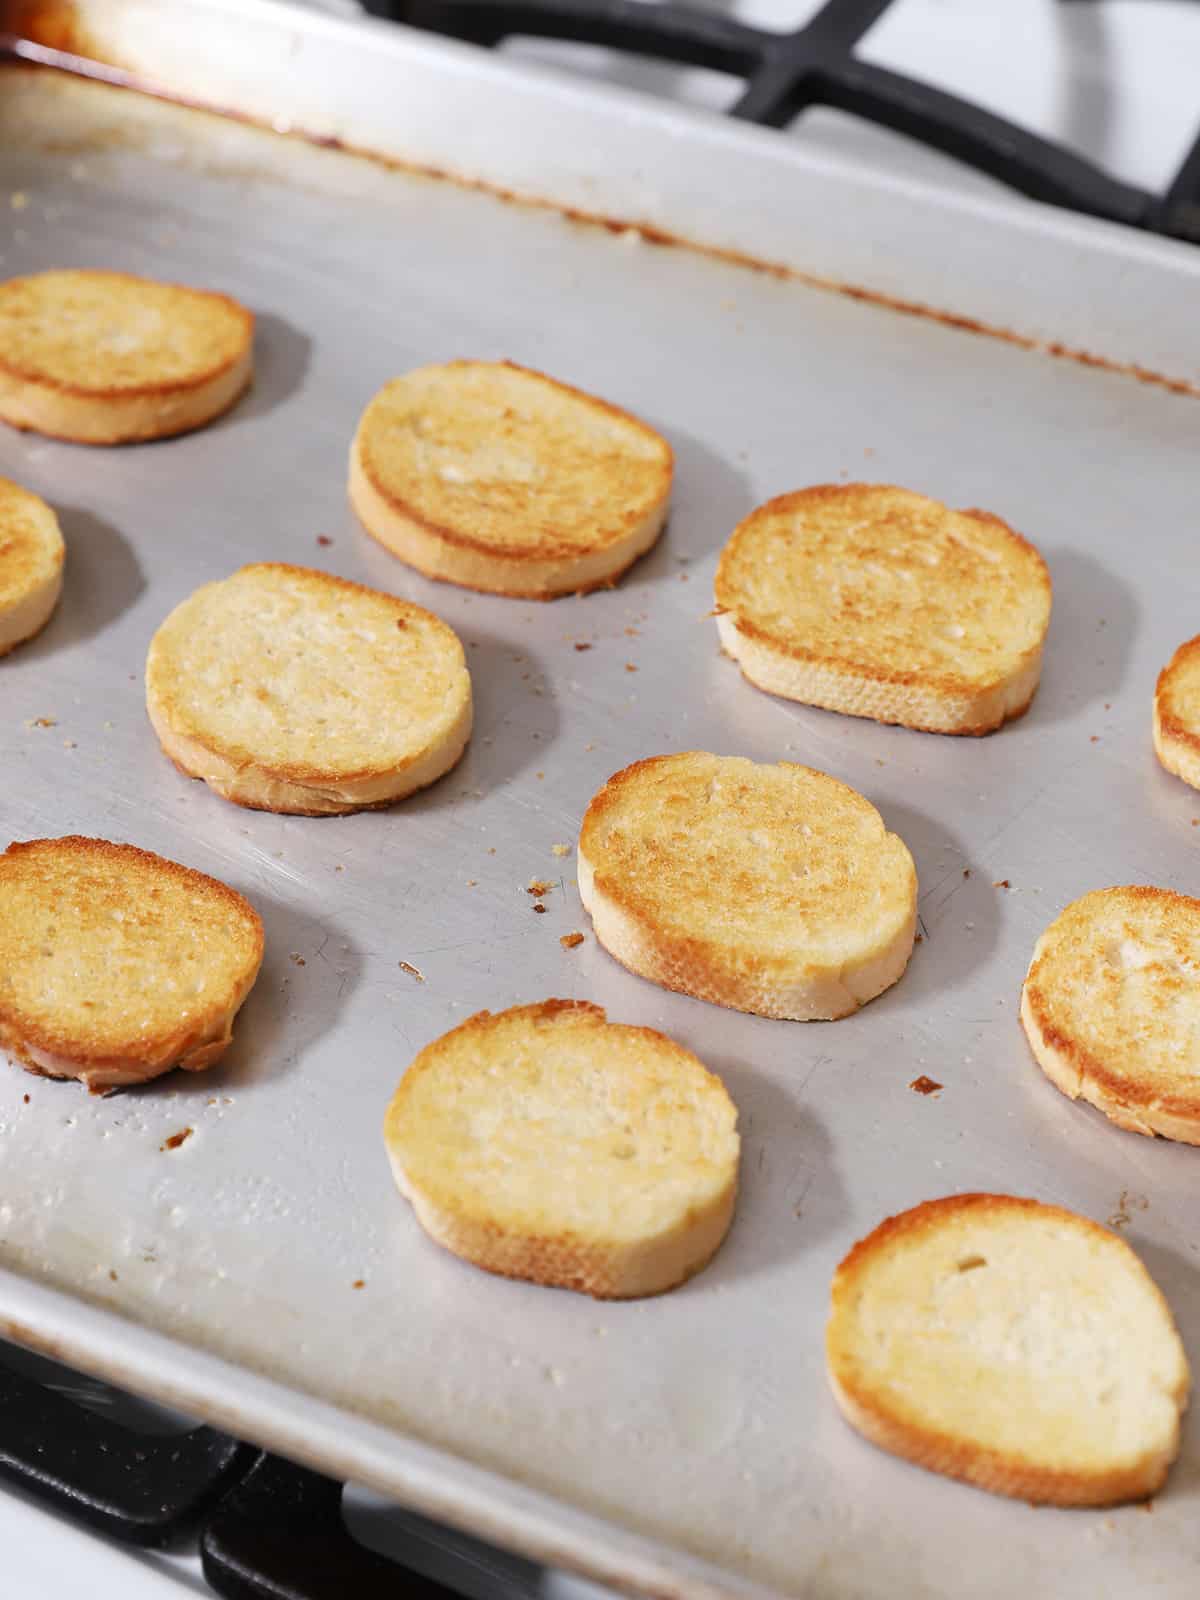 Slices of toasted French bread on a baking sheet. 